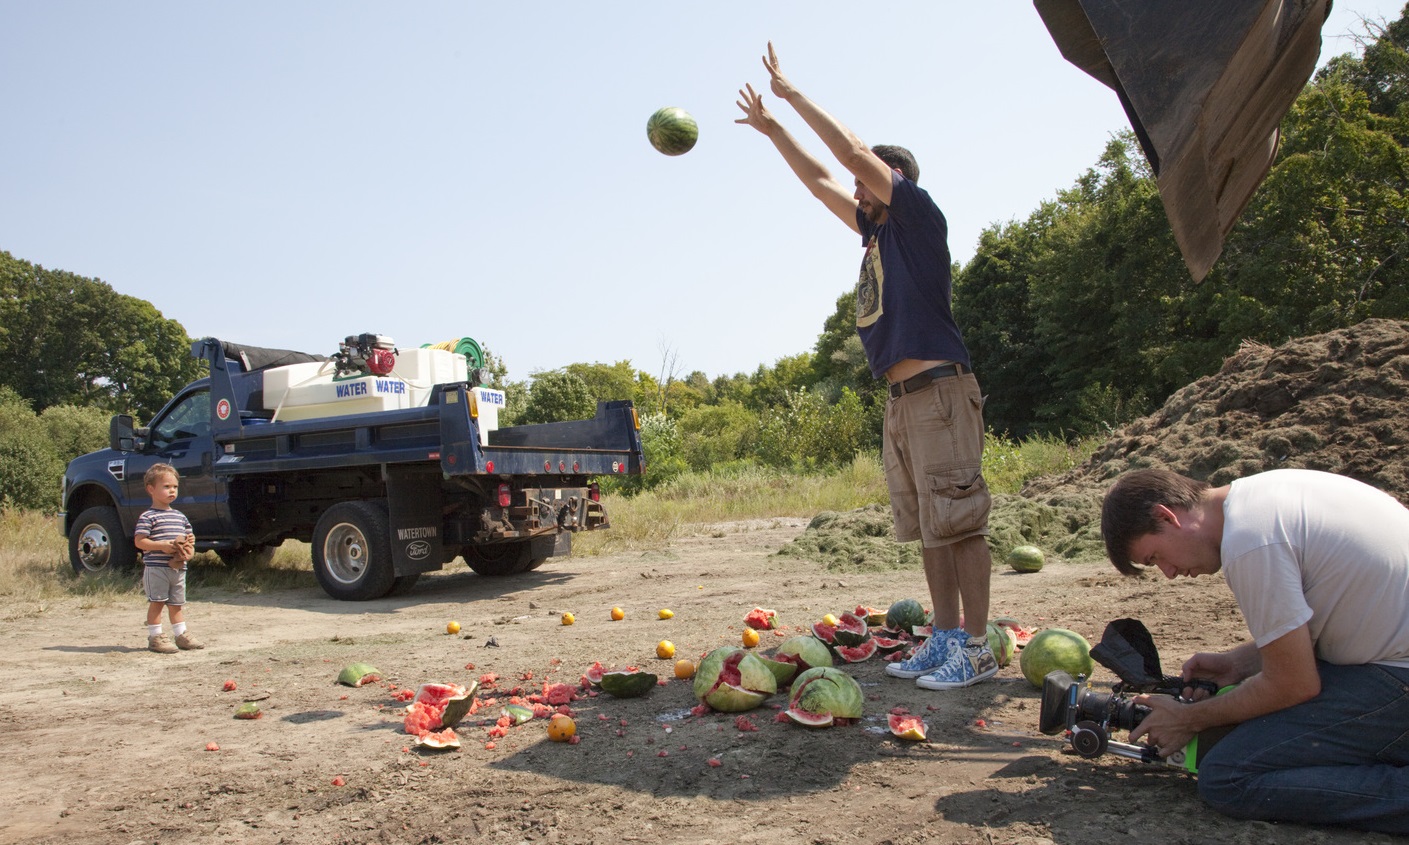 Jeff filming on set throwing watermelons